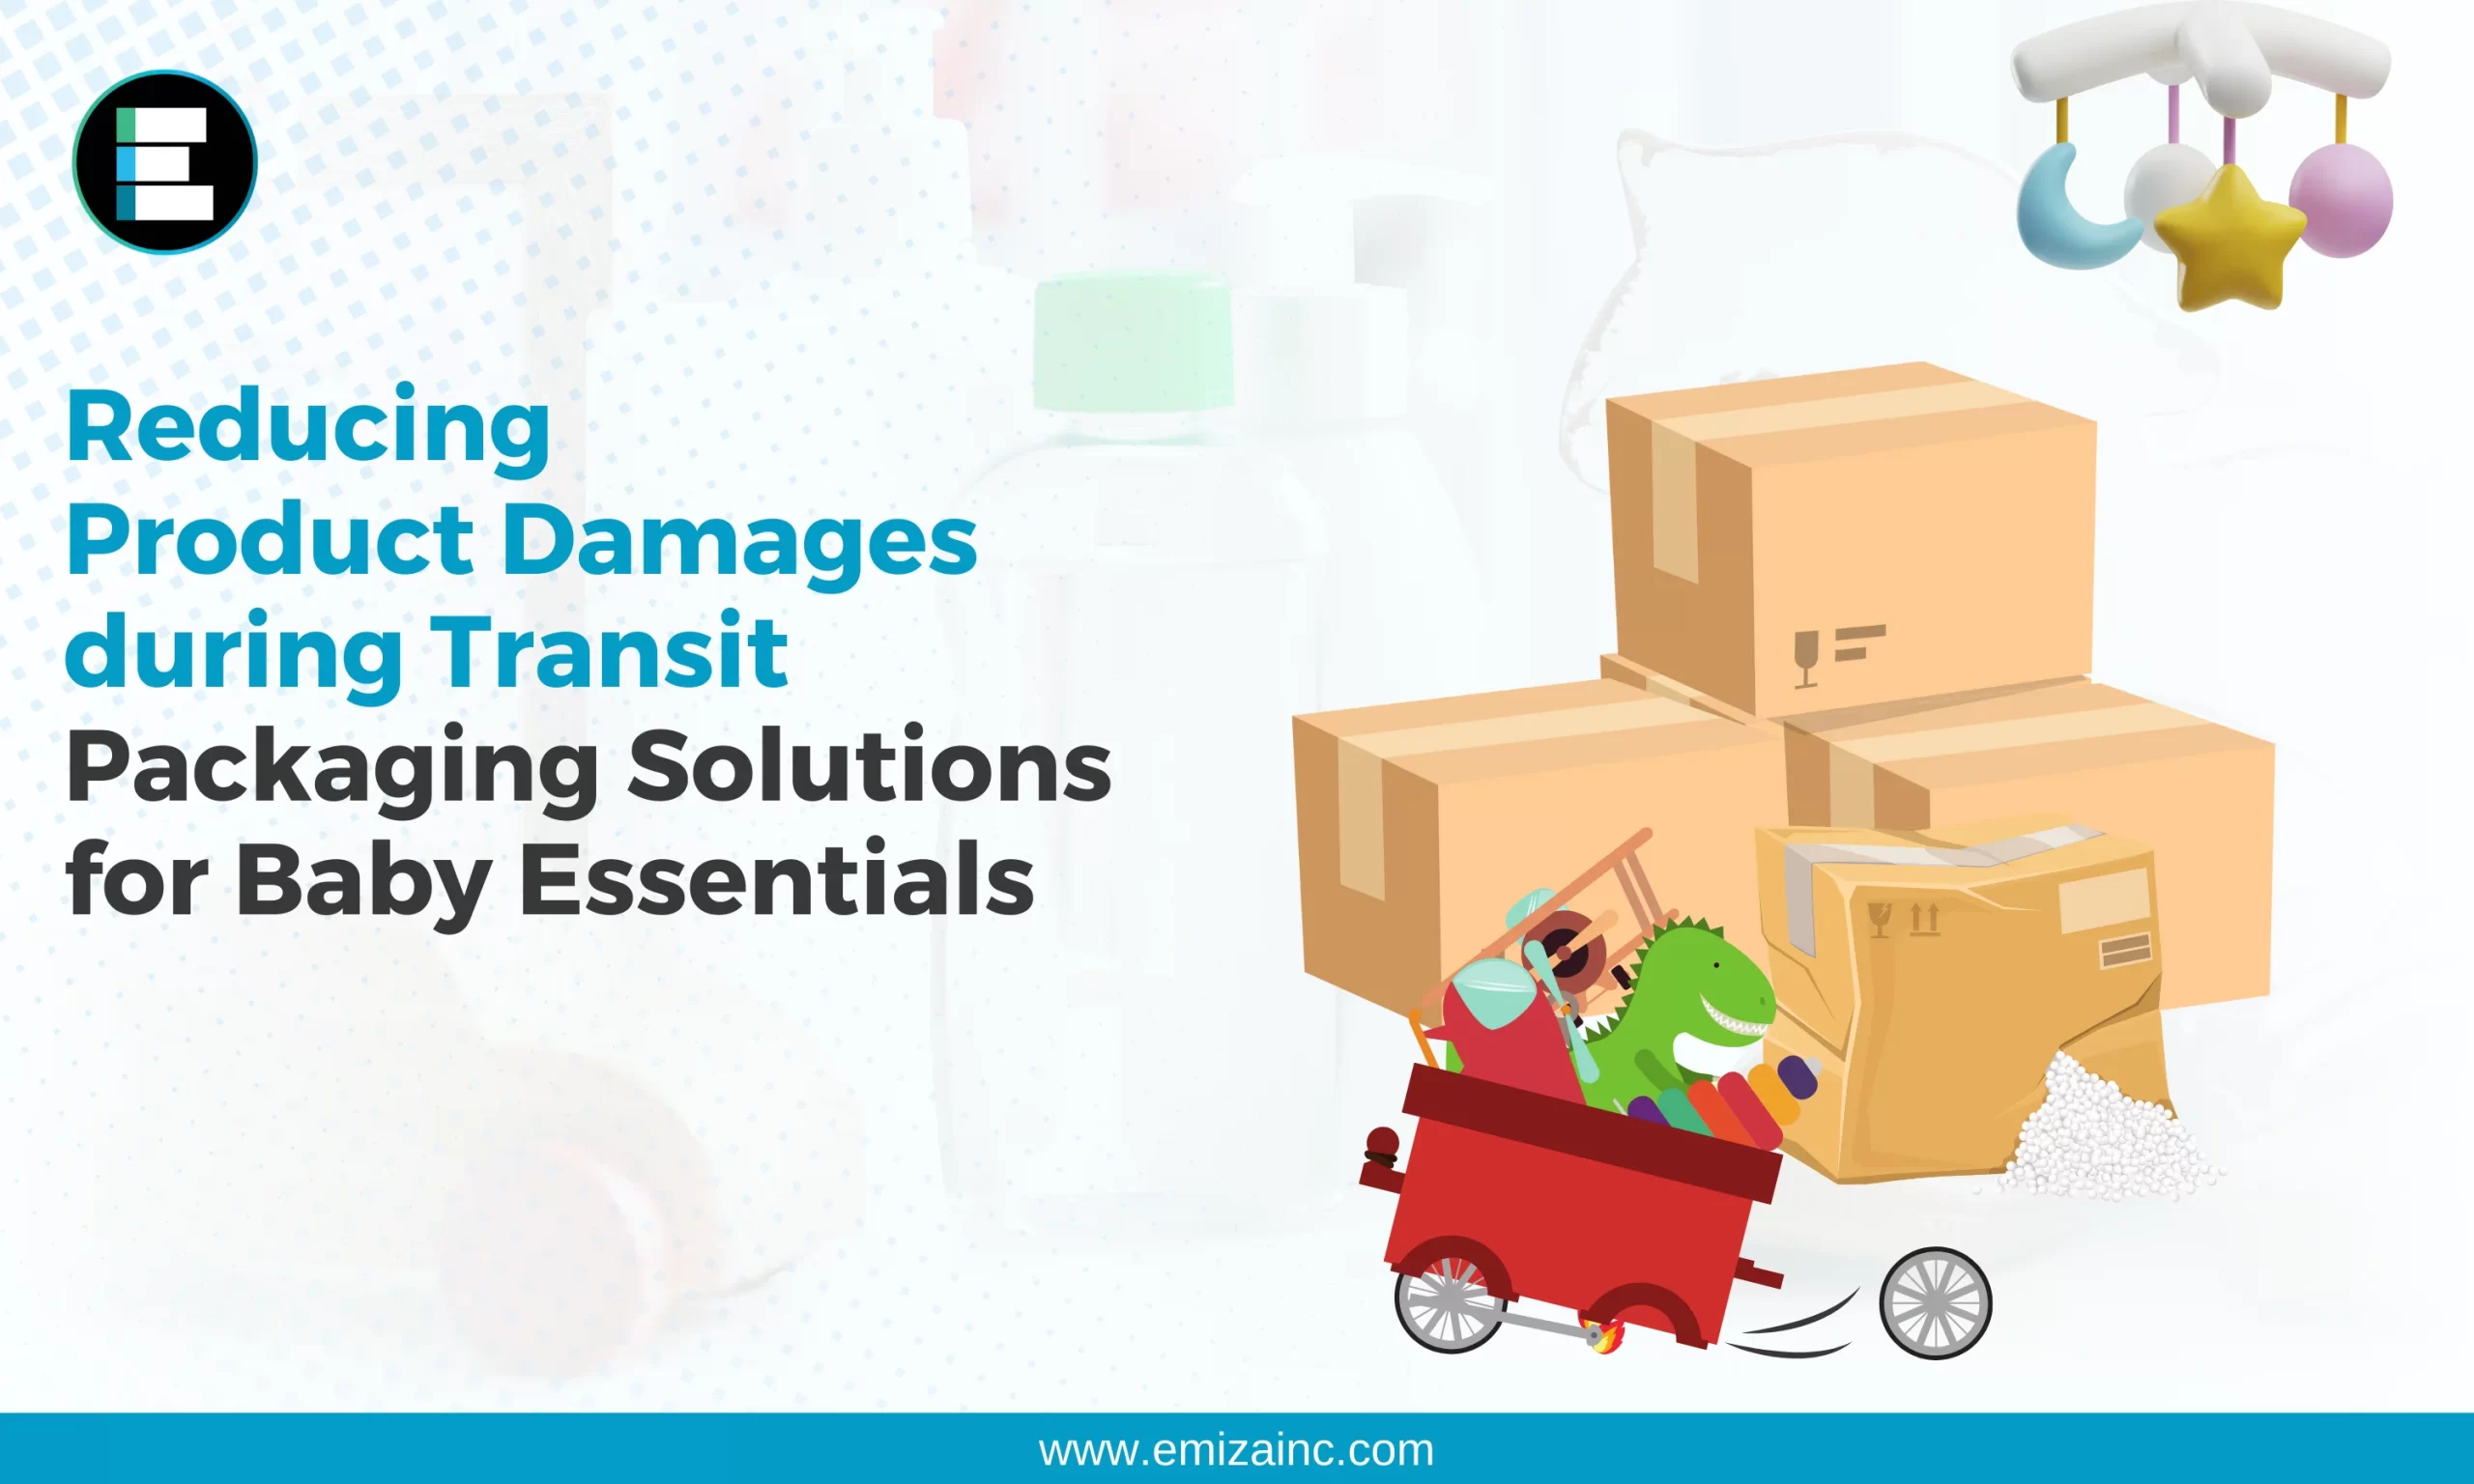 Reducing Product Damages during Transit: Packaging Solutions for Baby Essentials